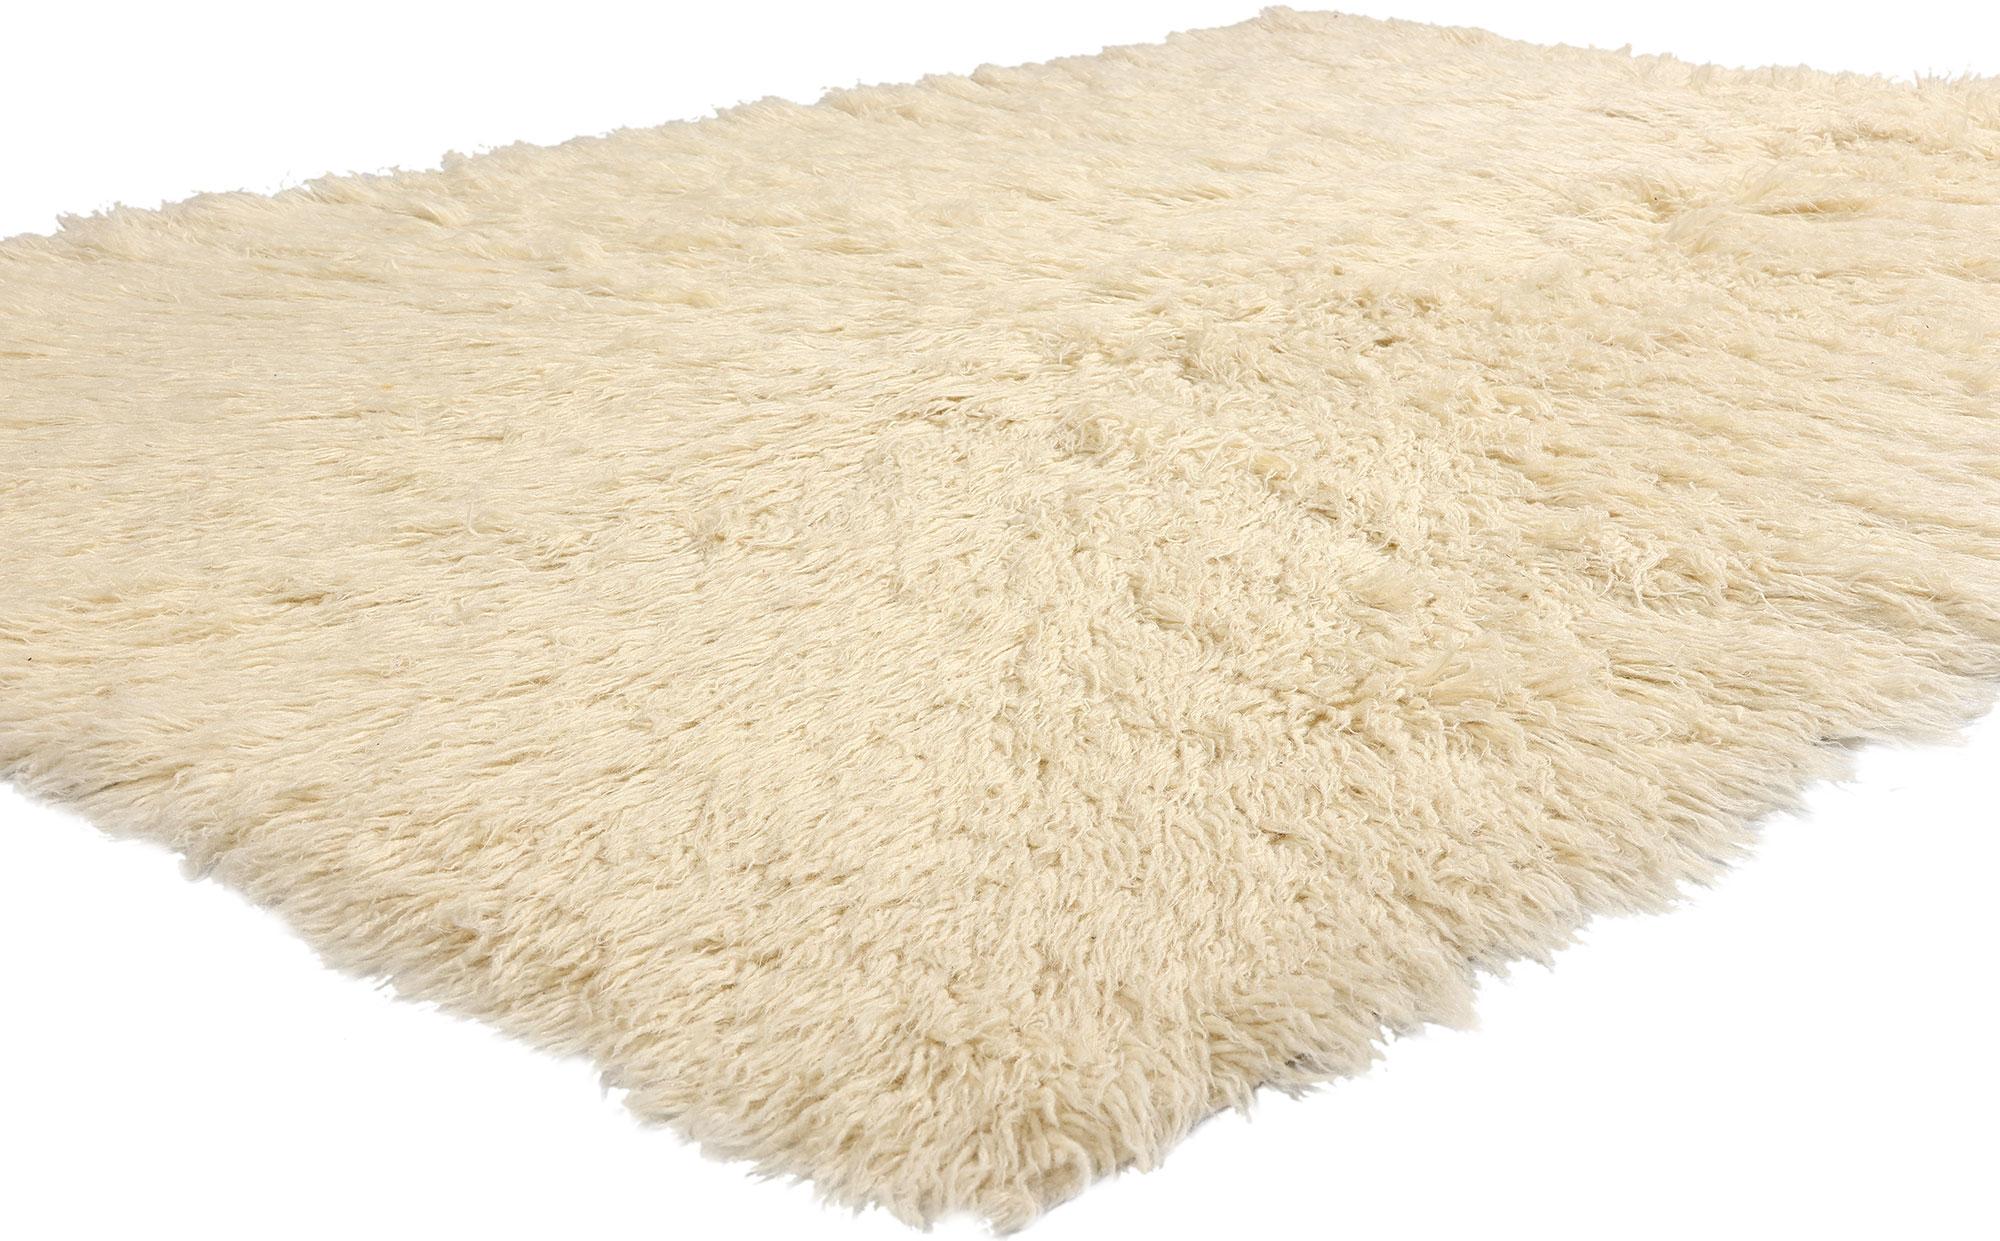 53945 Vintage Greek Natural Flokati Rug, 05'01 x 06'06. Flokati rugs, originating from Greece's Epirus region, are timeless handwoven woolen carpets celebrated for their plush, fuzzy texture and comforting warmth. Fashioned entirely from pure